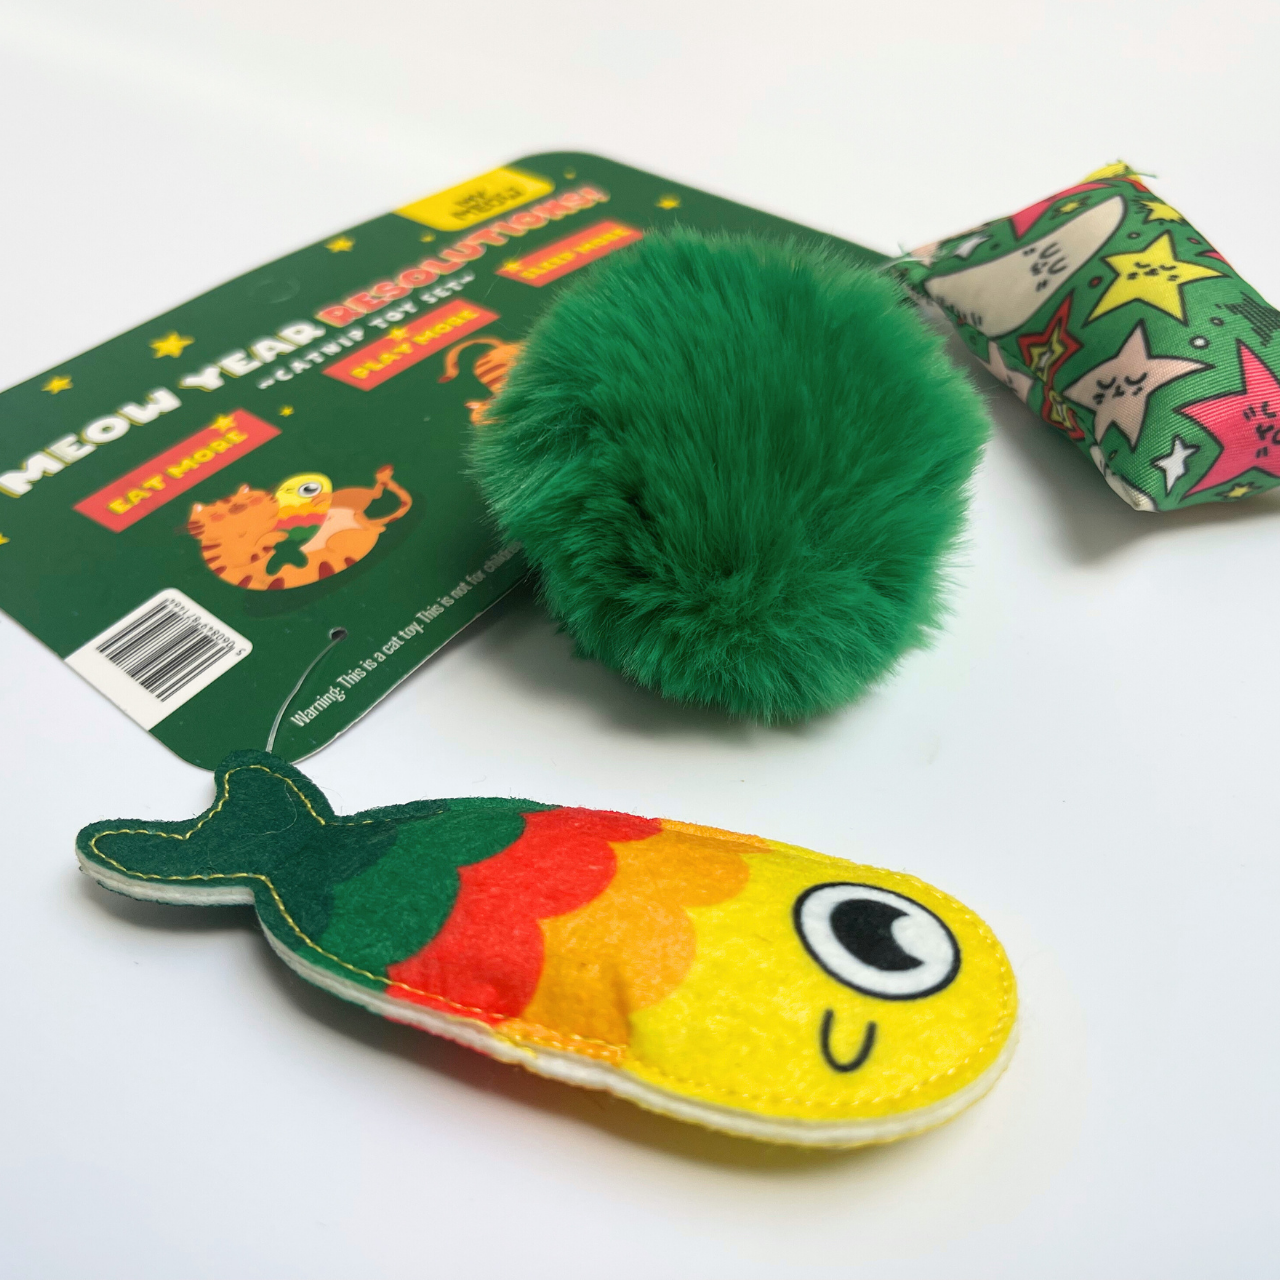 MyMeow - Meow Year Resolutions - Catnip Toy Set